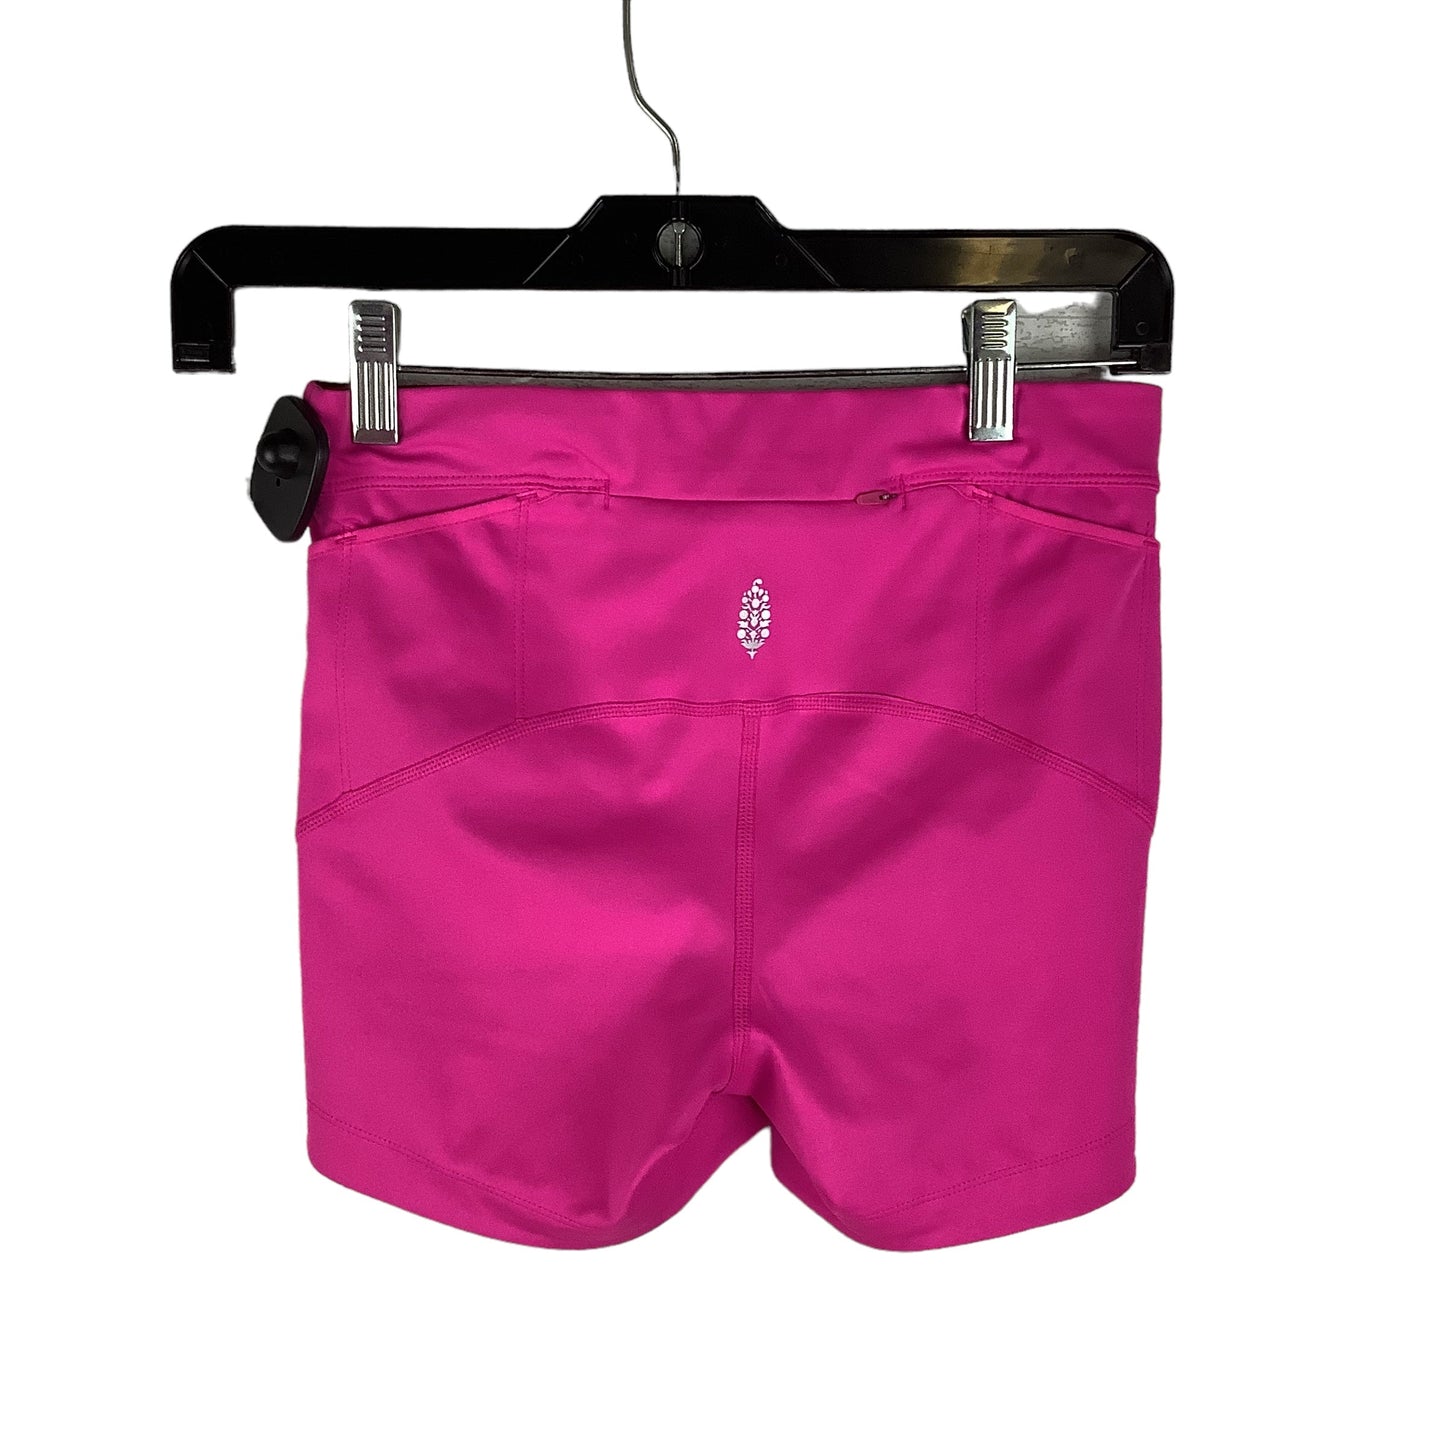 Pink Athletic Shorts Free People, Size Xs